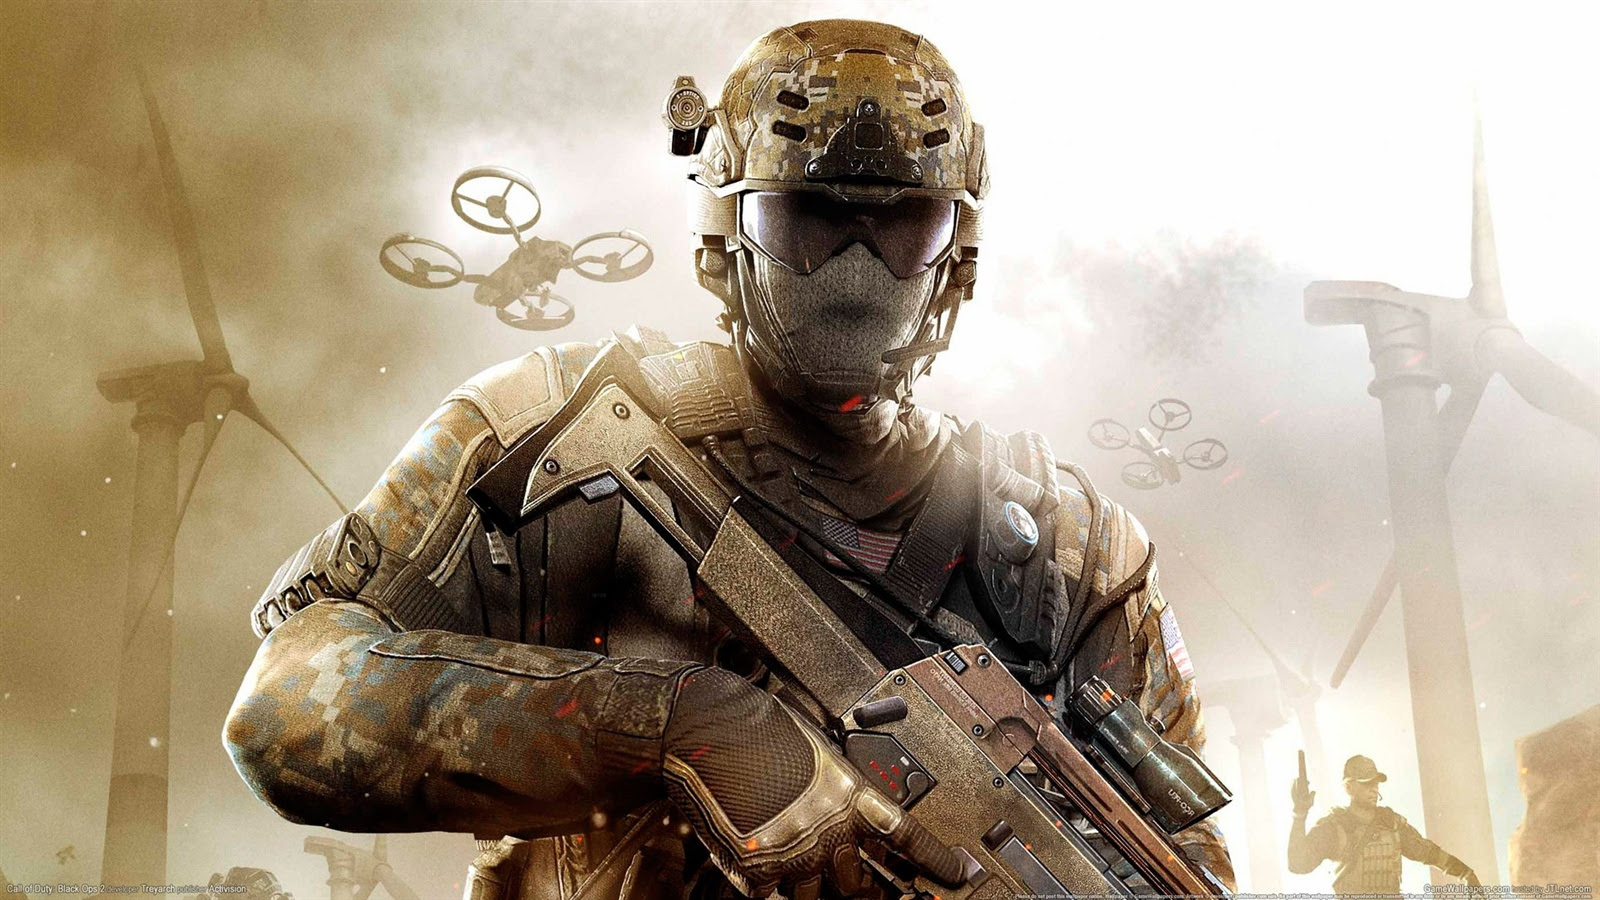 Best Settings For Call Of Duty Mobile On Laptop Wikimod.Co ... - 